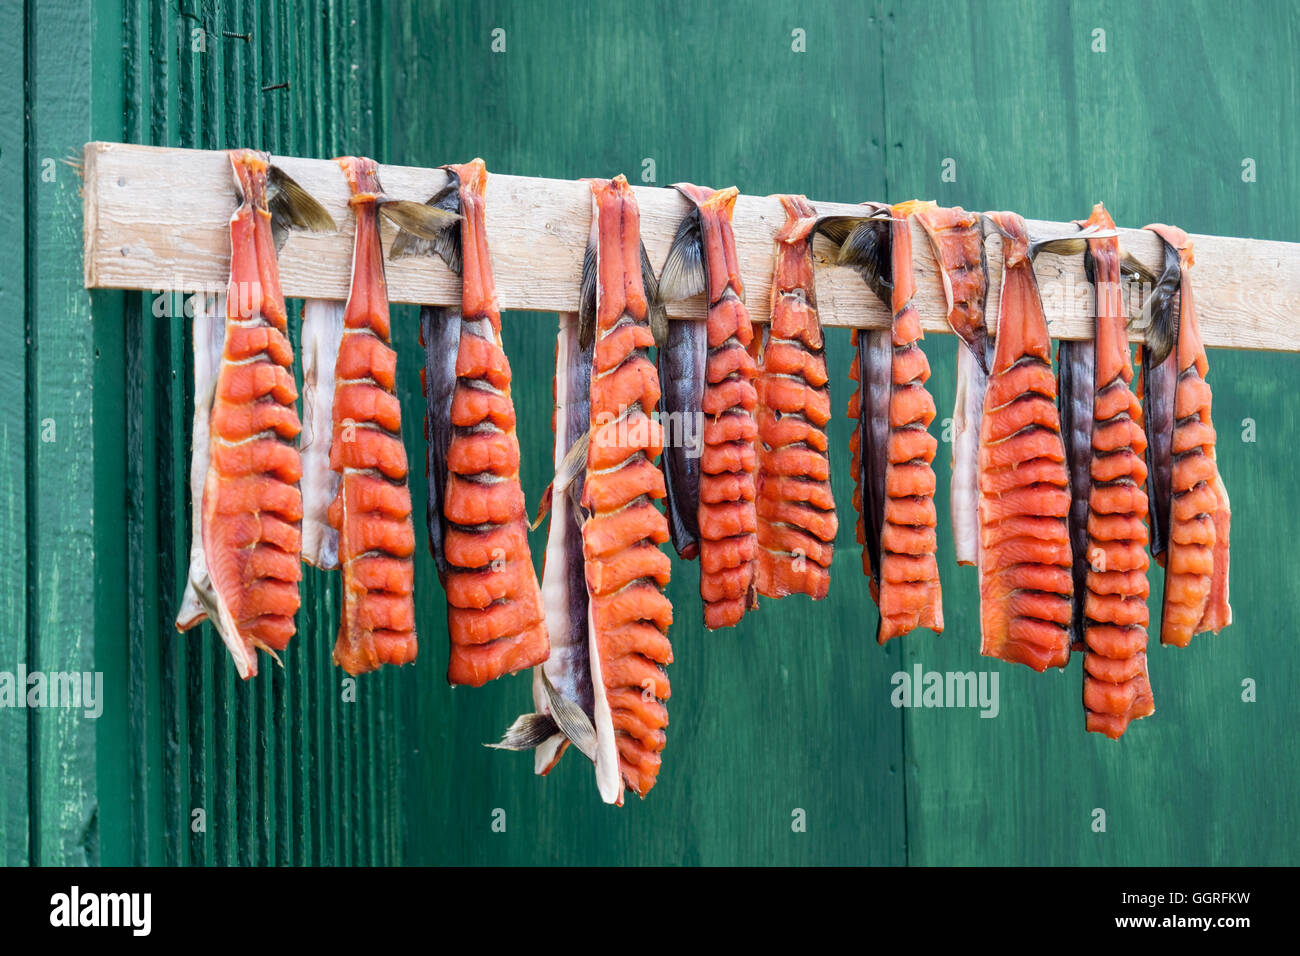 Skinned Arctic charr fish hung outside an Inuit house to dry. Itilleq, Qeqqata municipality, Western Greenland. Stock Photo